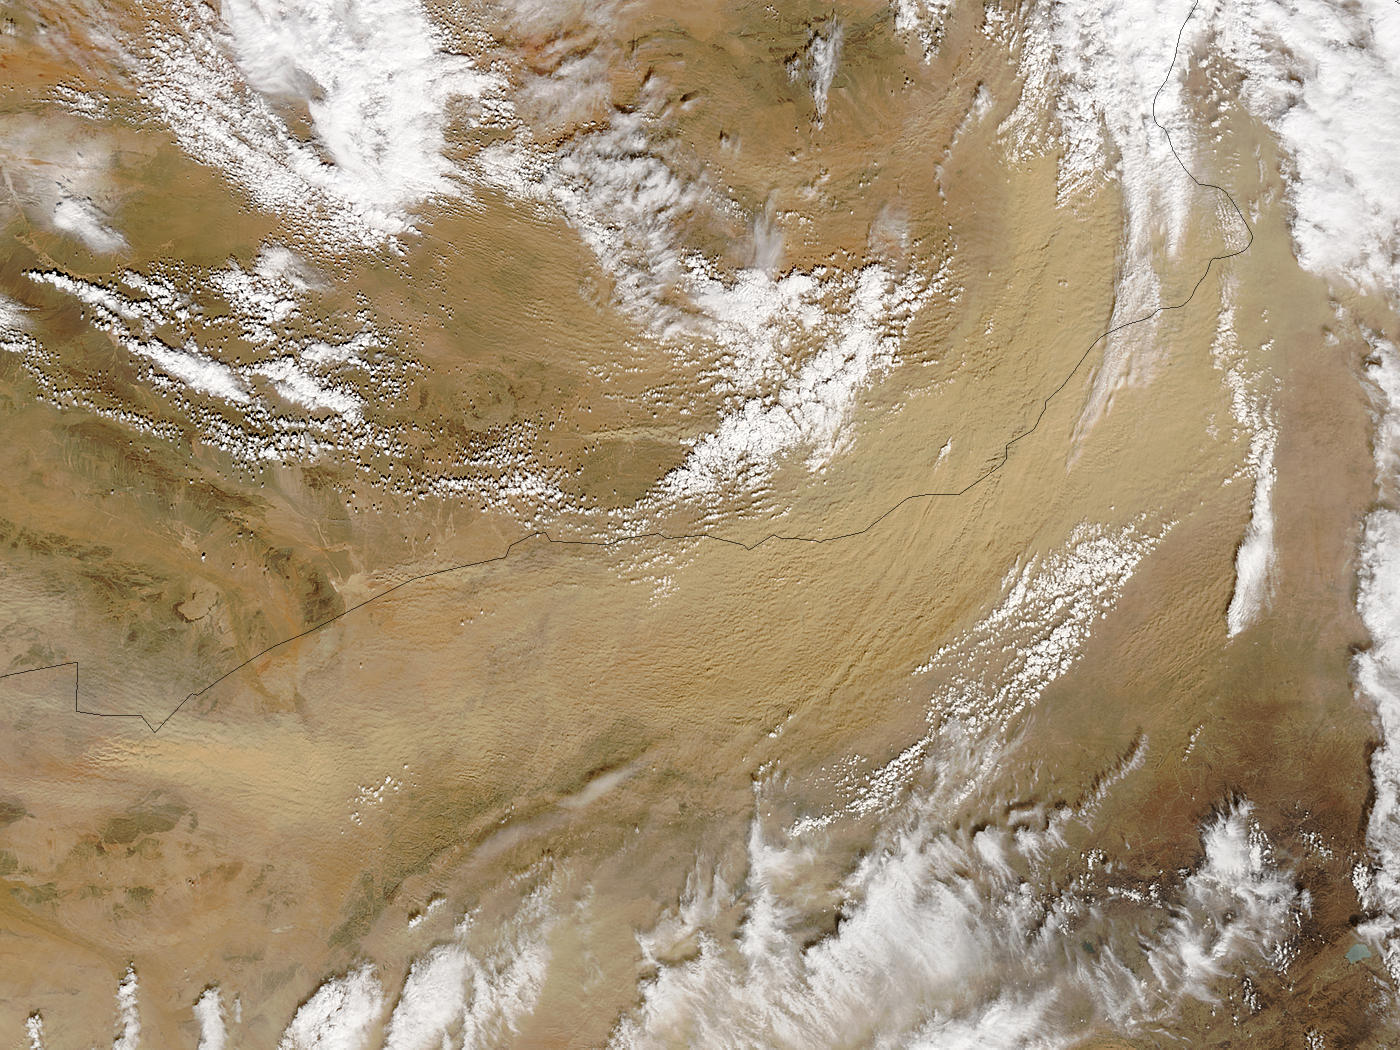 Dust storm in Gobi Desert, China - related image preview